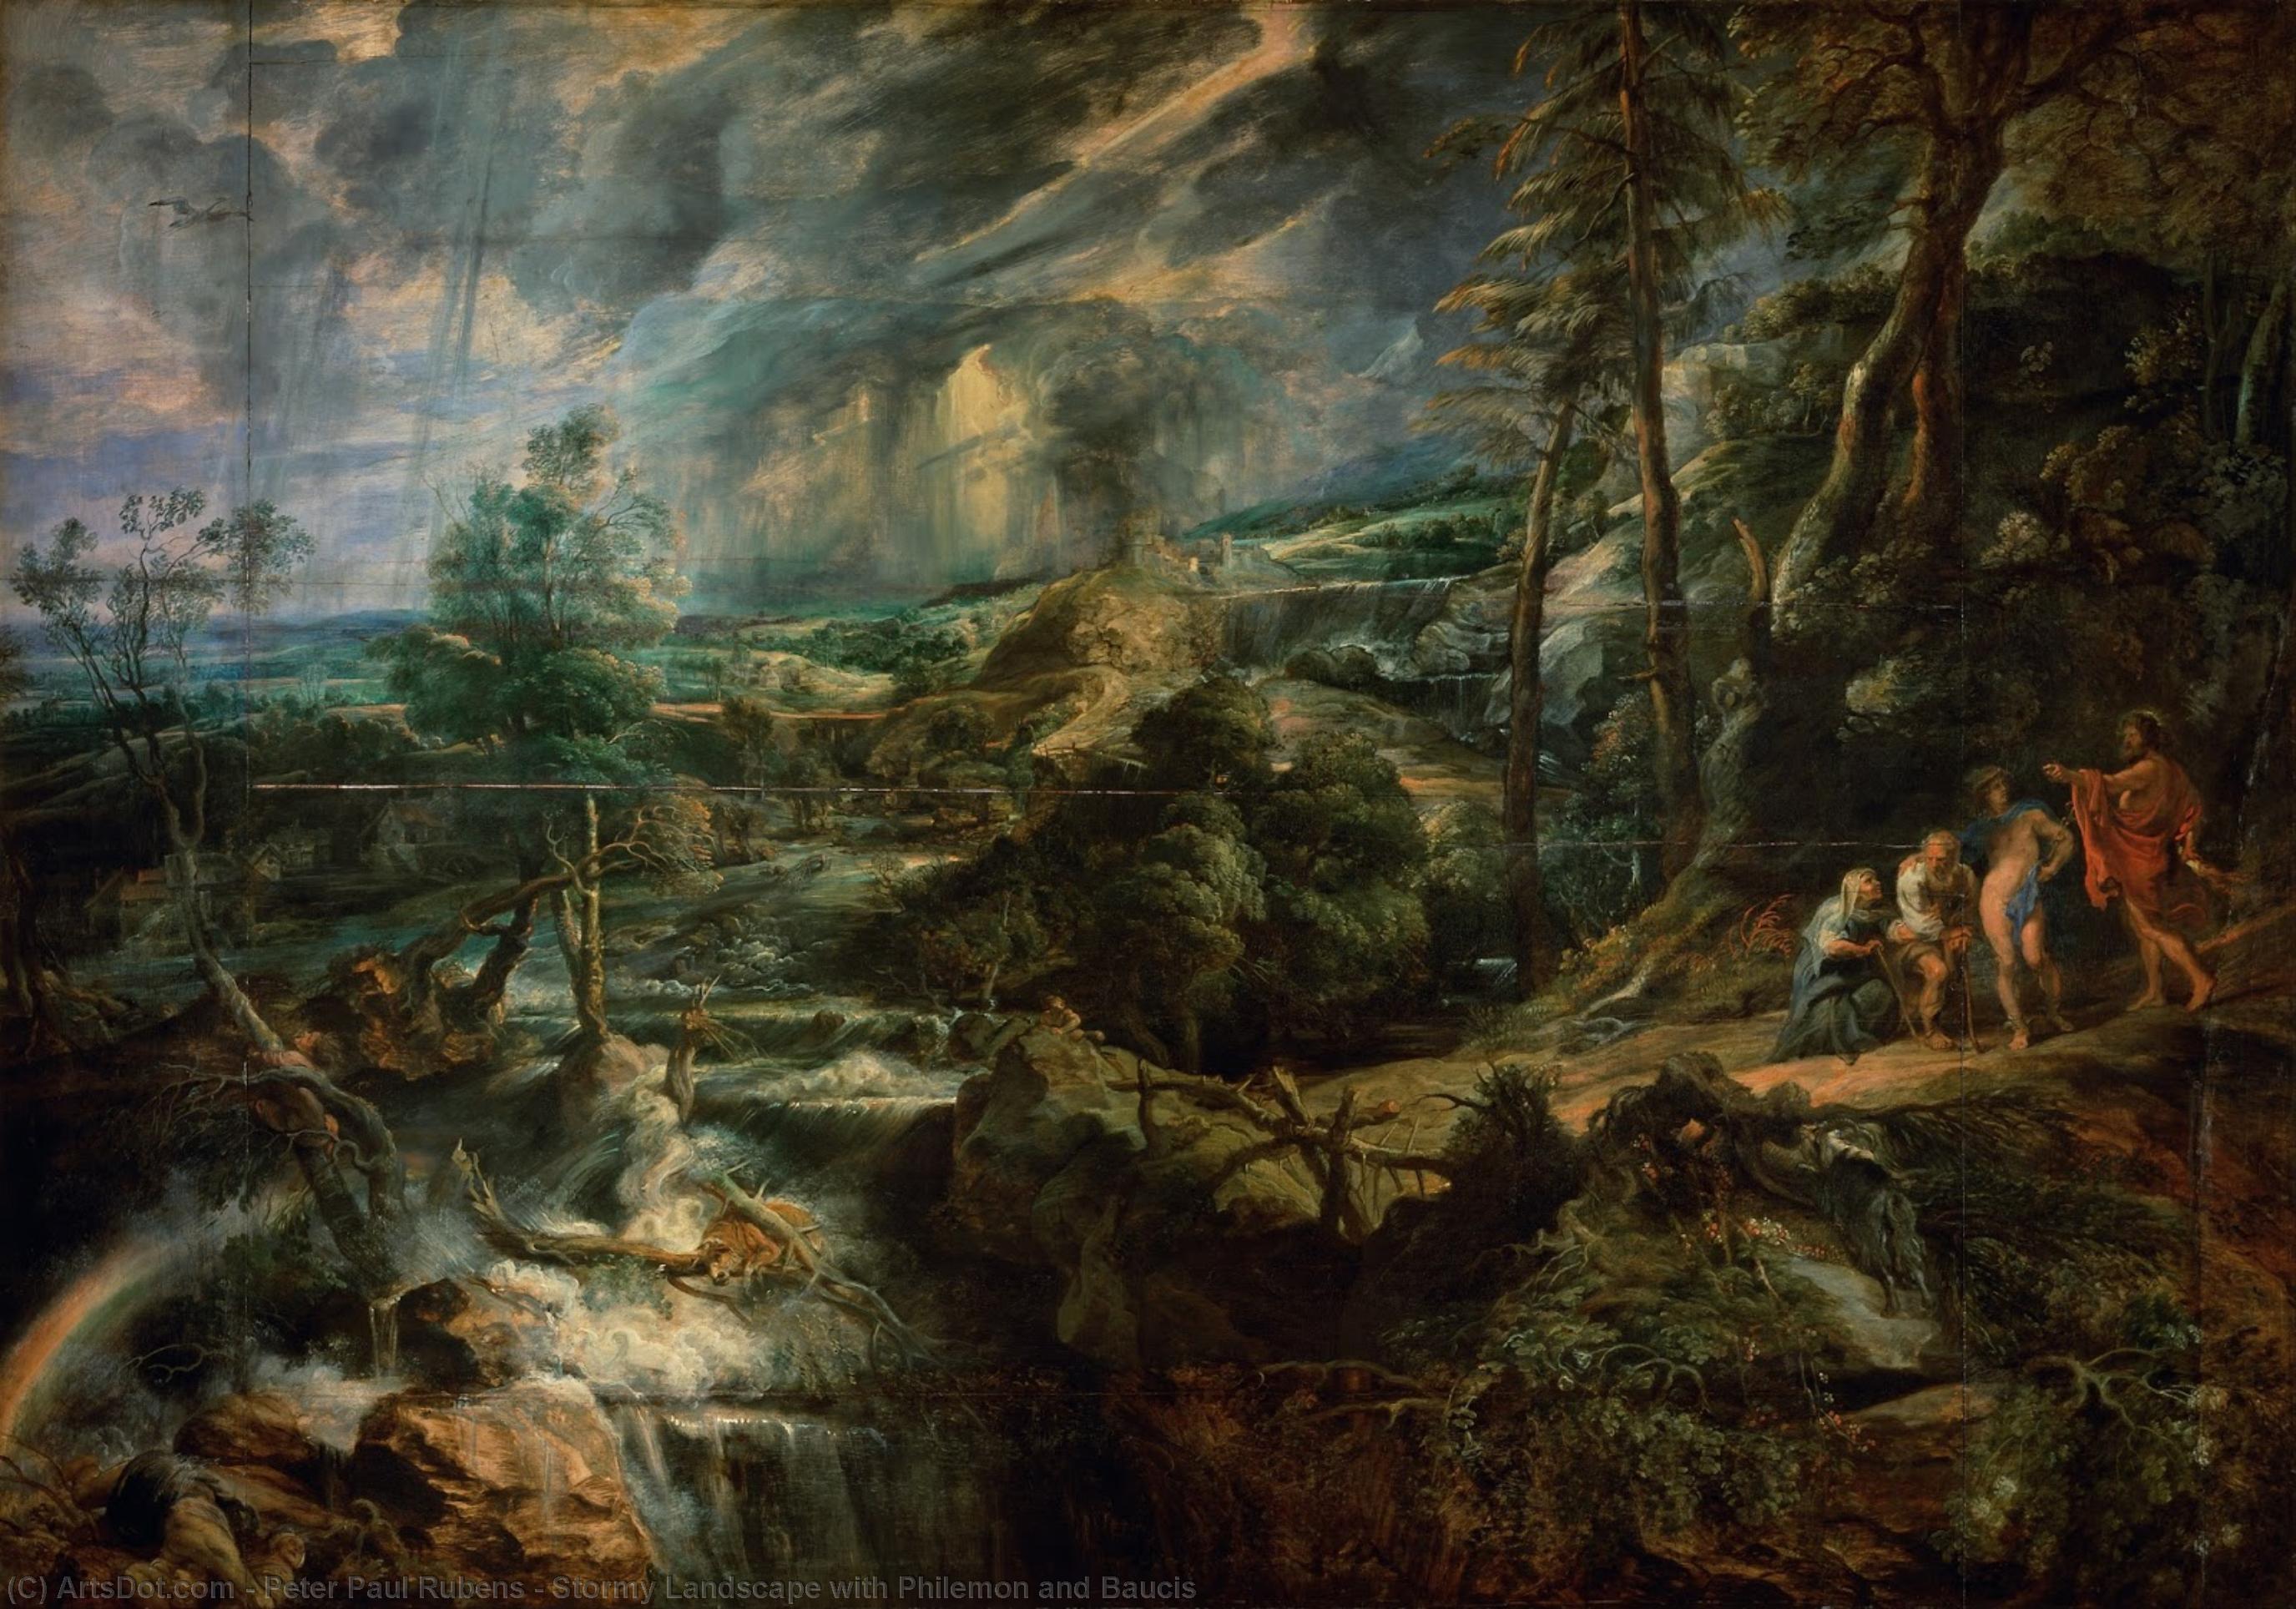 WikiOO.org - 백과 사전 - 회화, 삽화 Peter Paul Rubens - Stormy Landscape with Philemon and Baucis